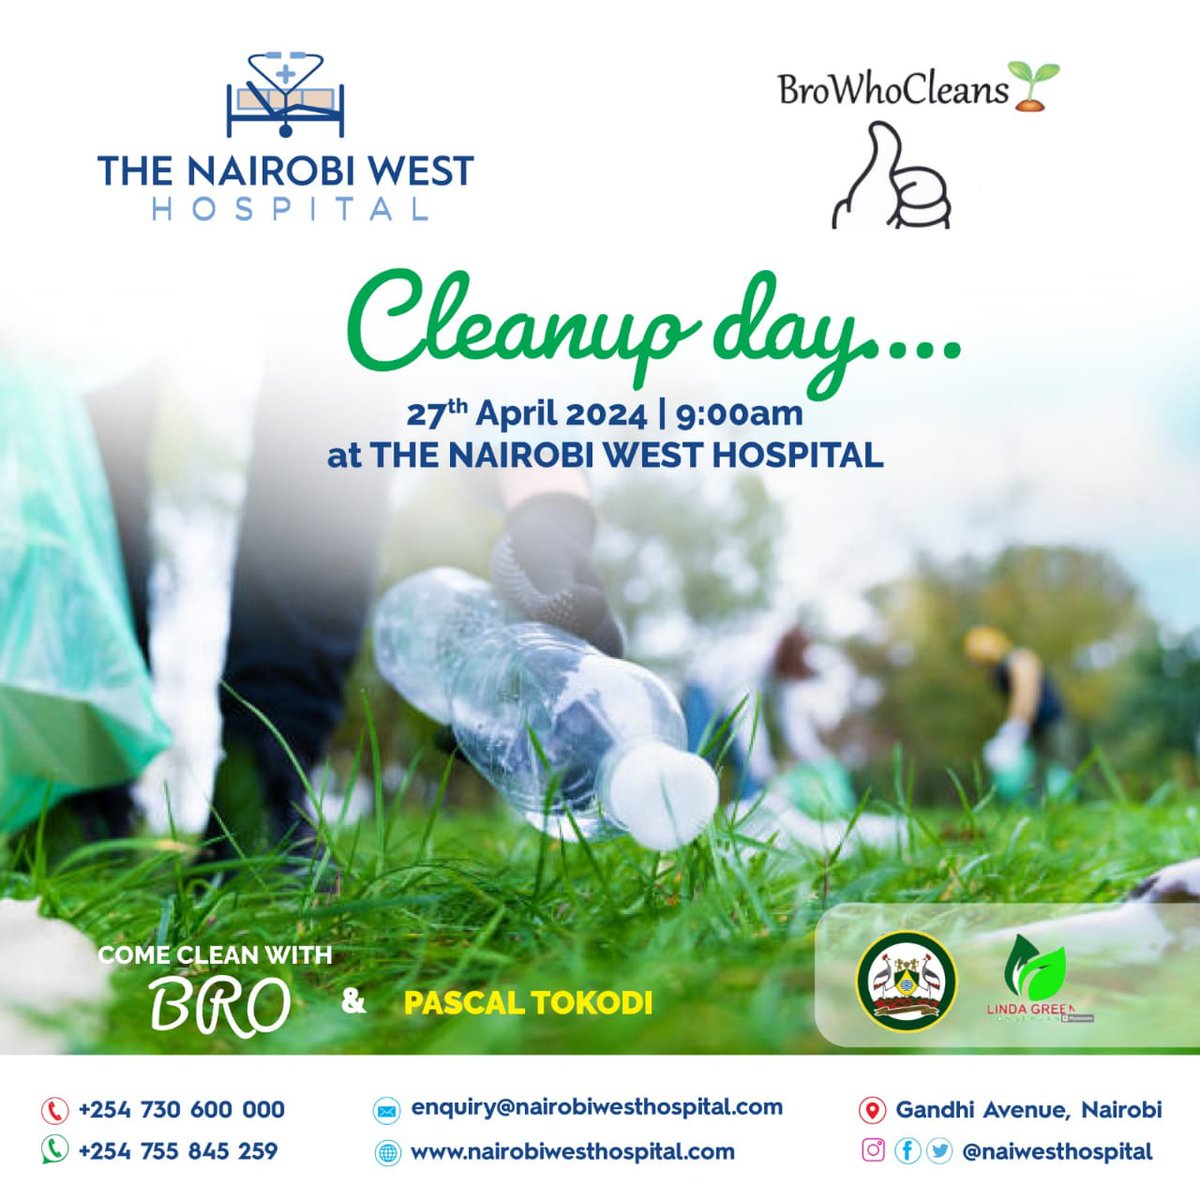 Join us this Saturday, April 27, 2024, at 9:00AM for The Nairobi West Hospital Community Cleanup! Let’s come together to make our neighbourhood cleaner and greener. Together, we can make a positive impact on our community’s health and well-being.